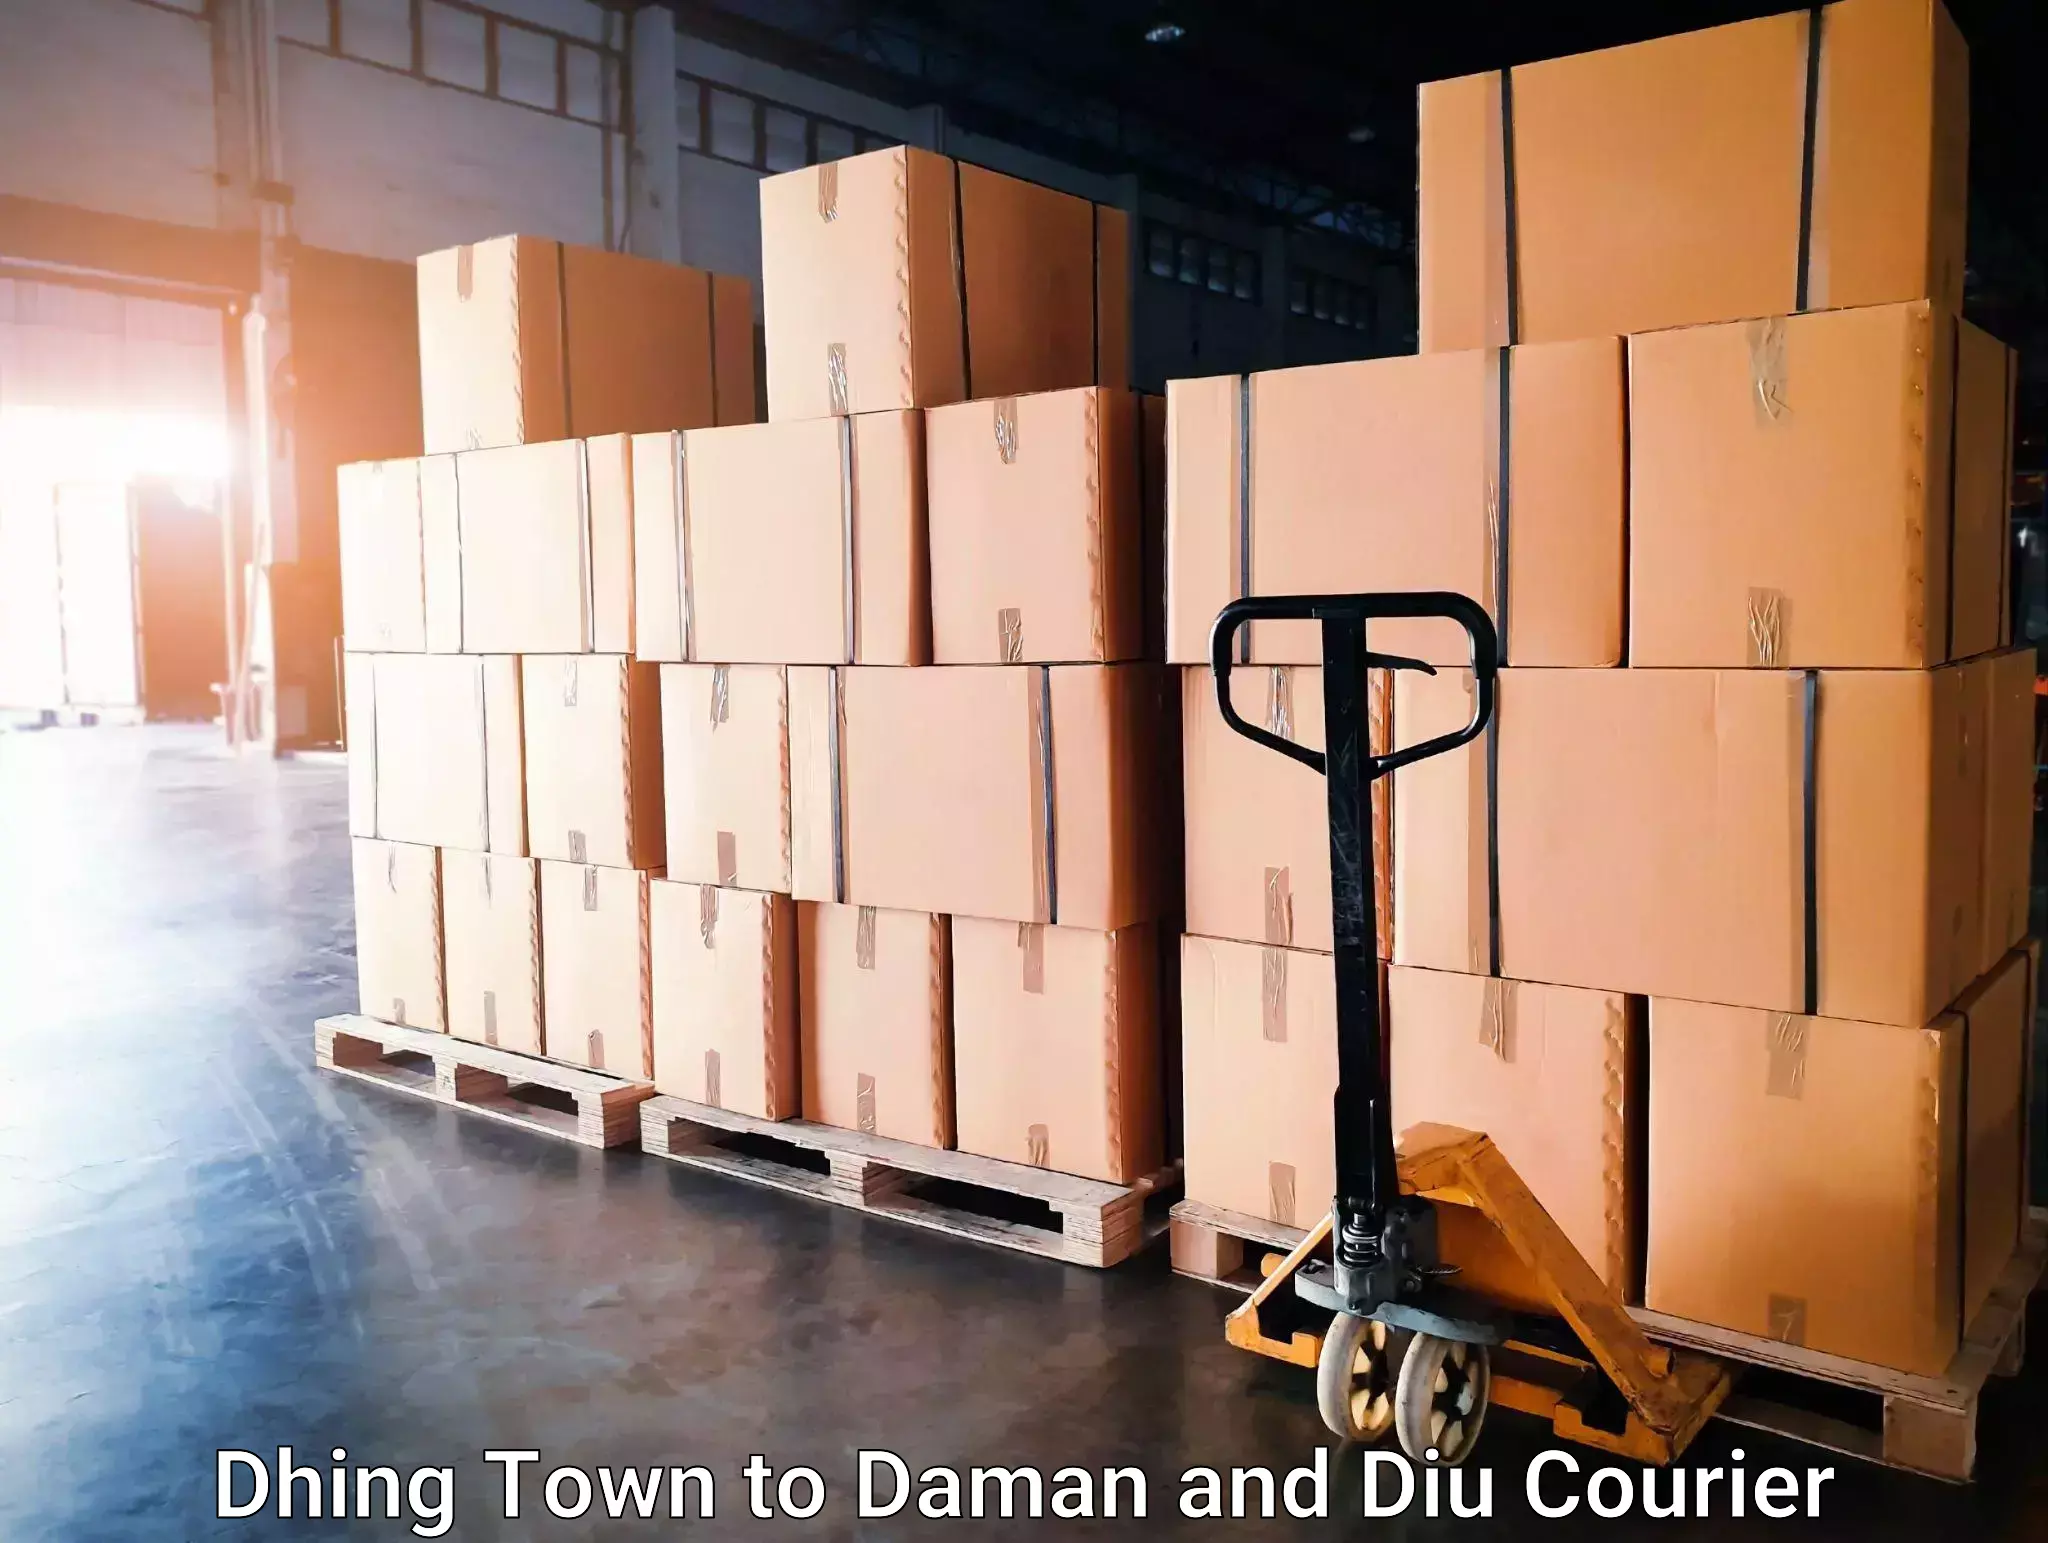 High-speed parcel service Dhing Town to Daman